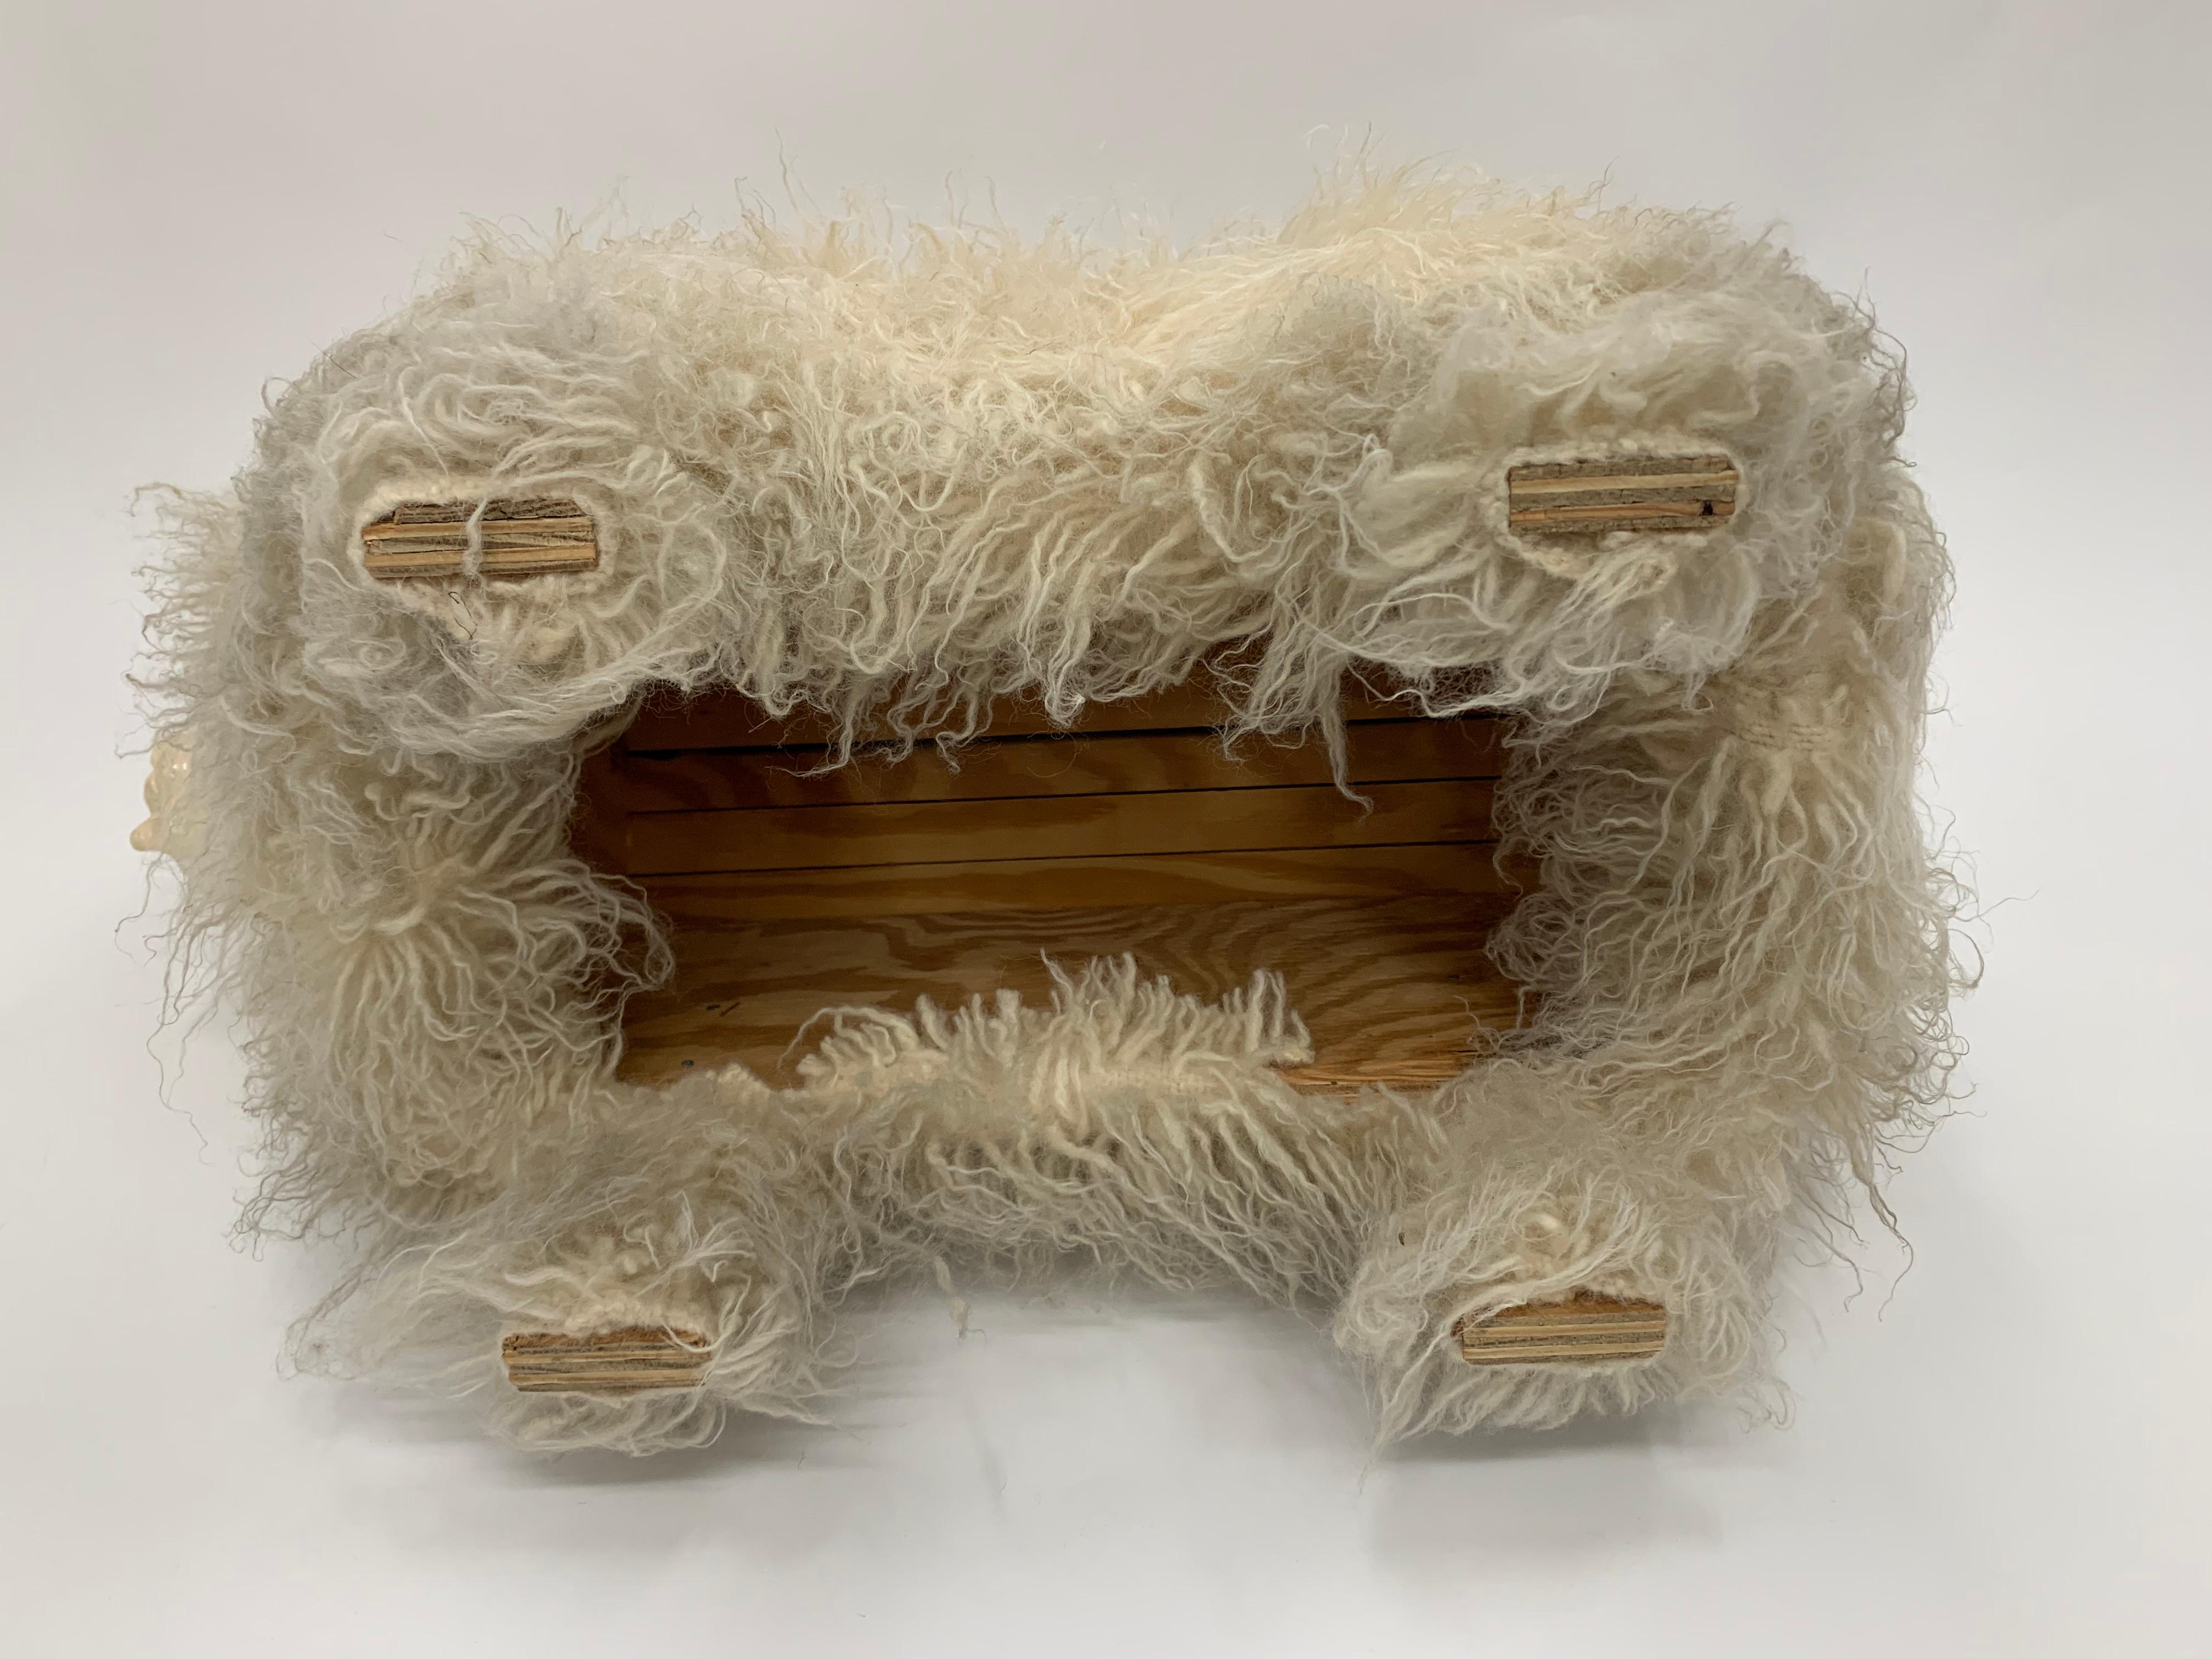 Sculptural Edna Cataldo Pig Flokati Wool Foot Stool, Signed and Dated 1995 5